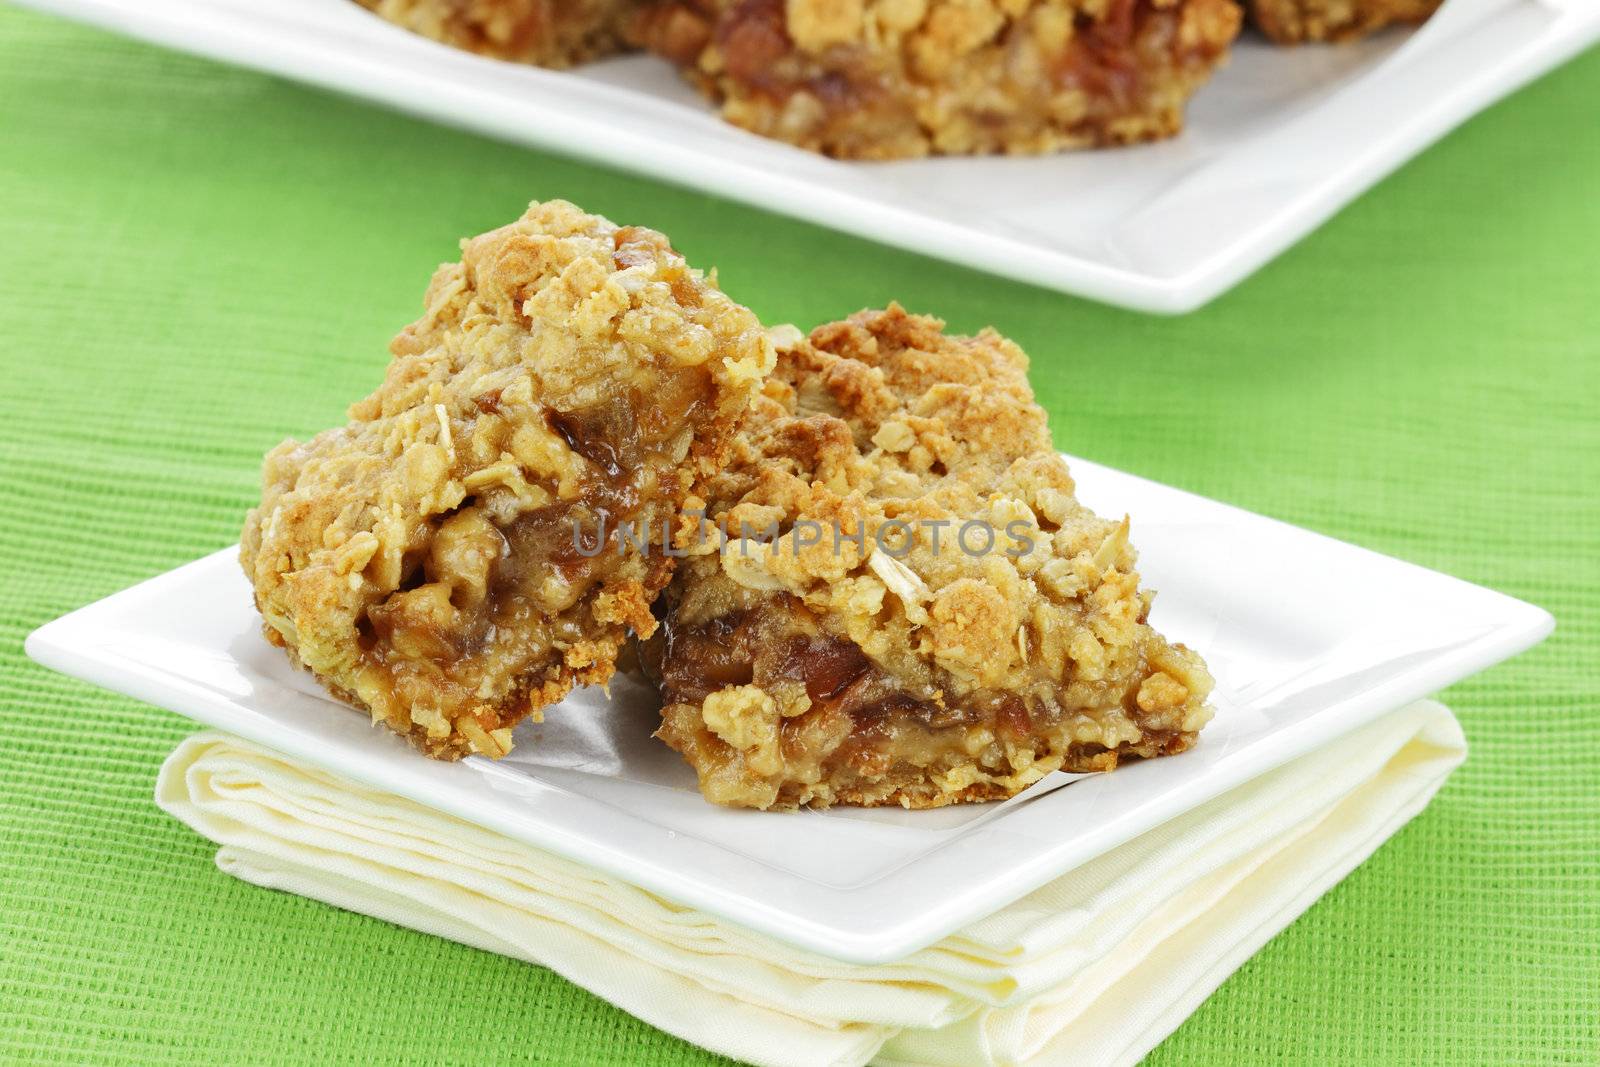 Delicious date bars made with oats and pitted dates.